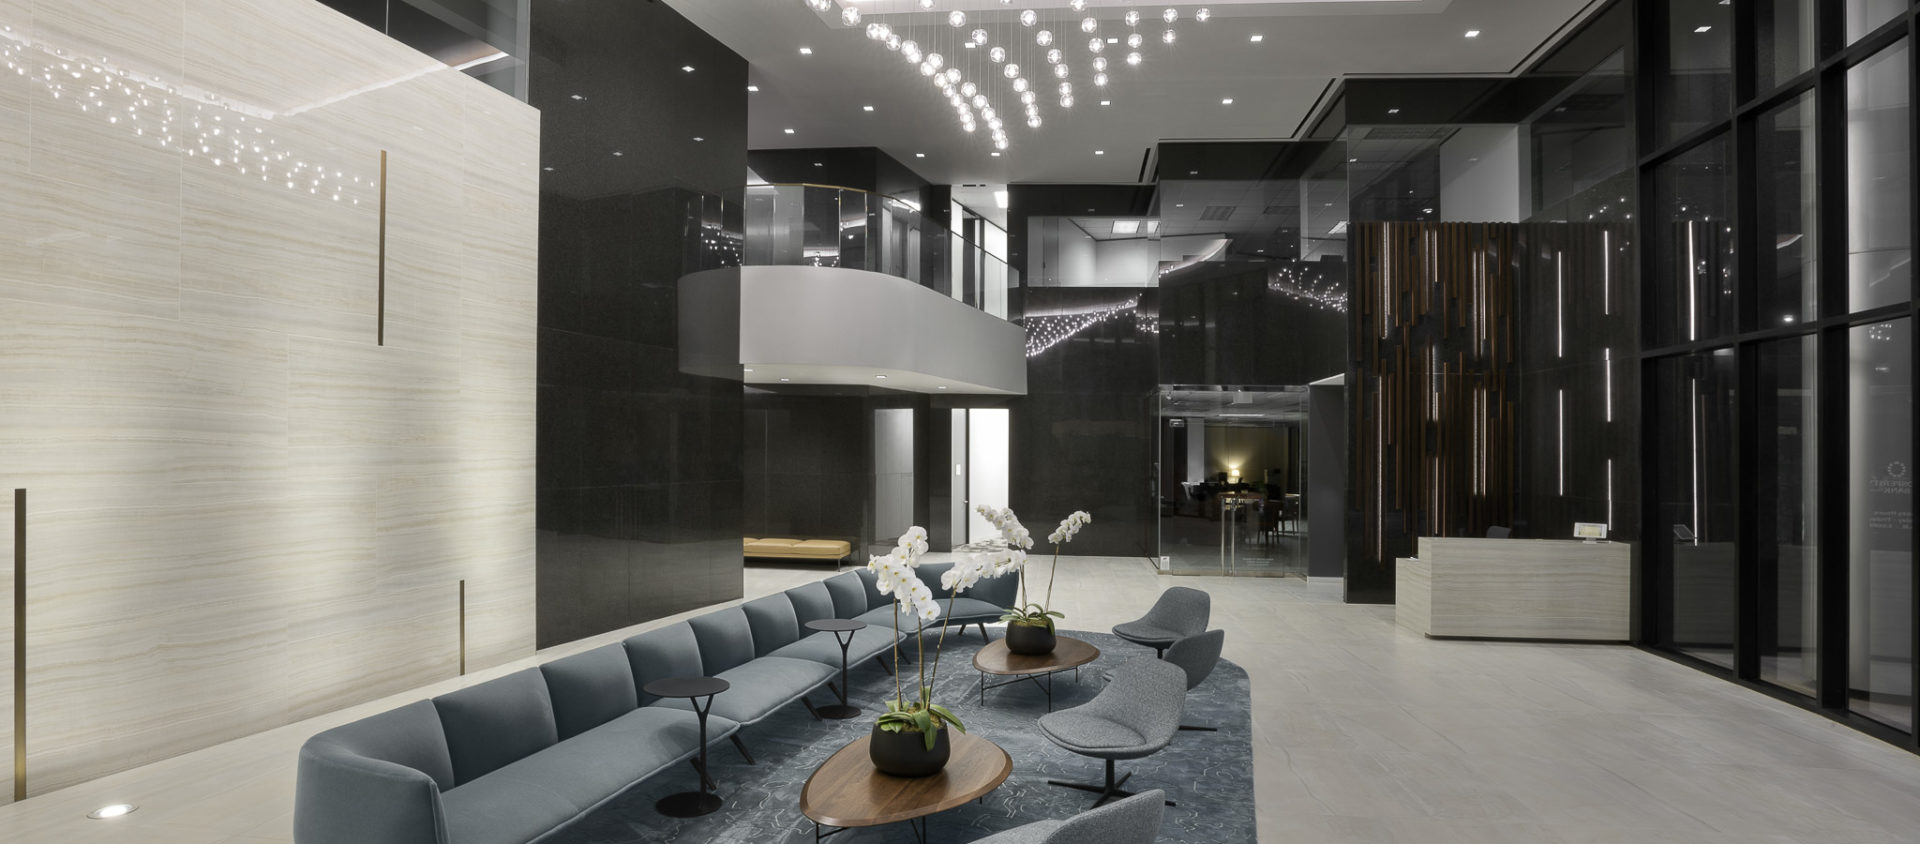 First impressions count, make yours unforgettable with an elegant building lobby.